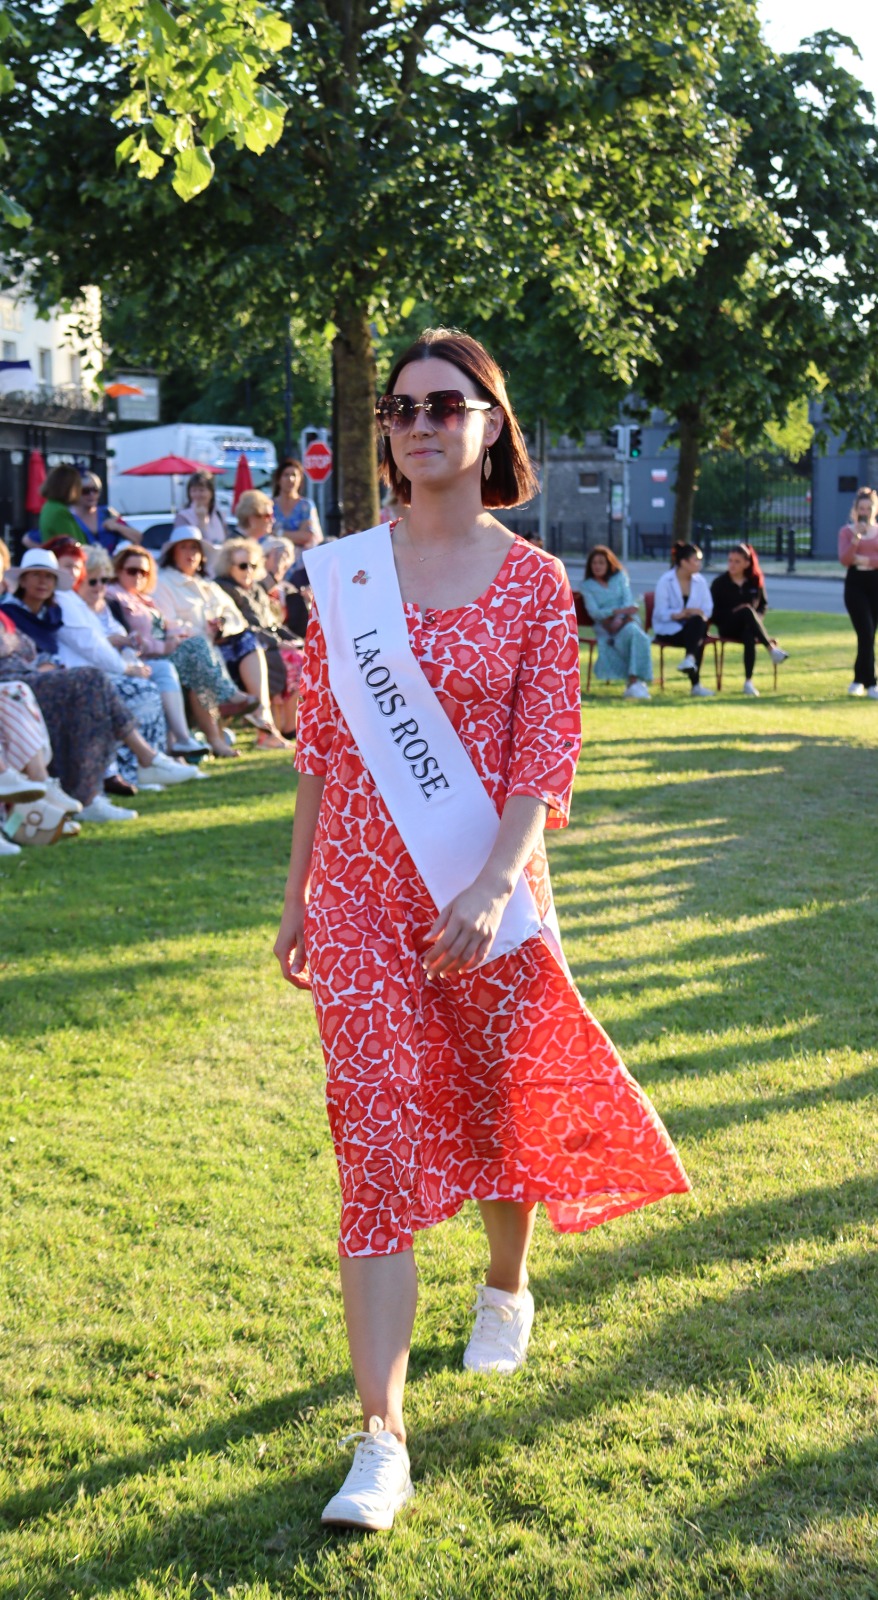 Laois Rose 2023 Sinead Dowd takes part in the Fifty-Seven fashion show